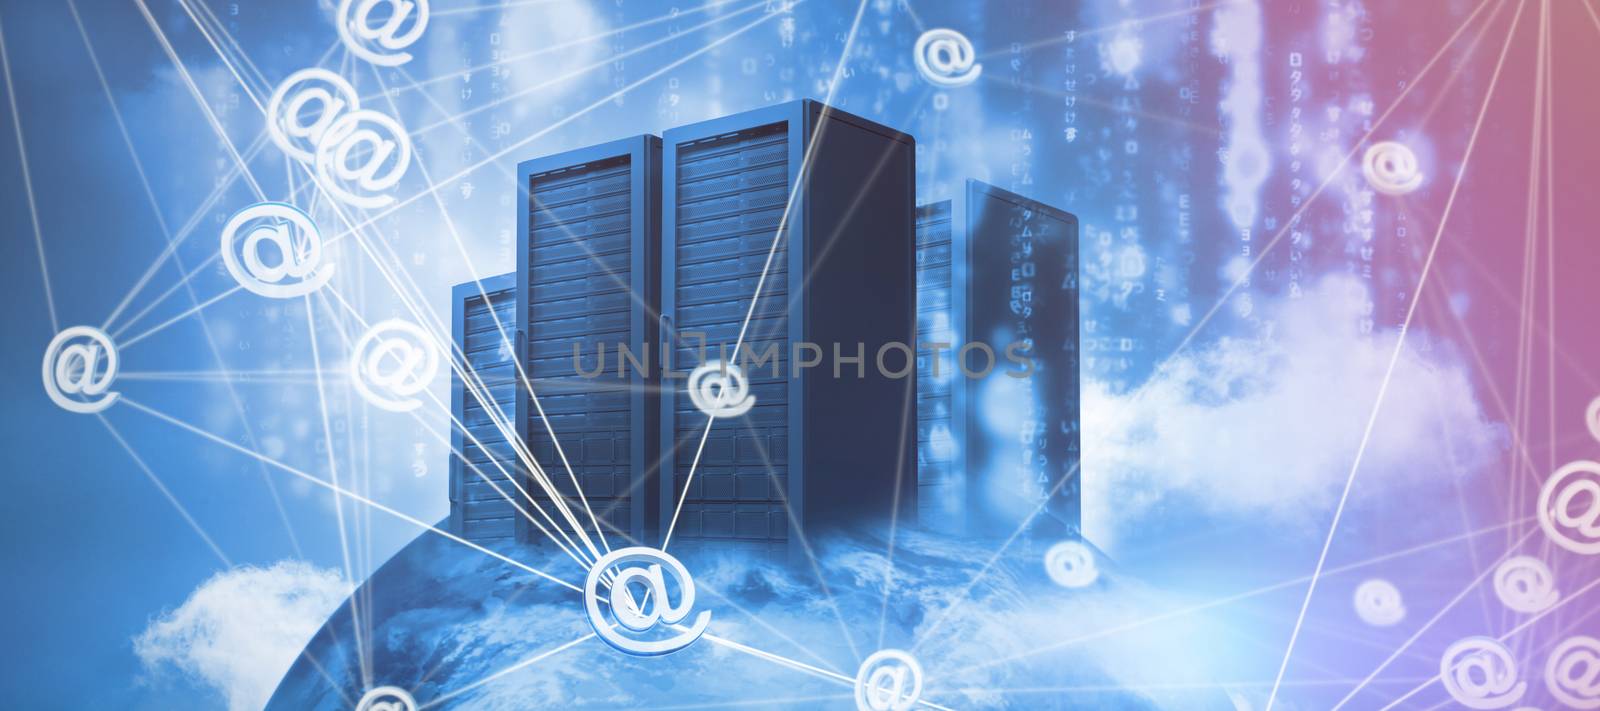 Abstract image of at email sign against server racks against sky and cloud